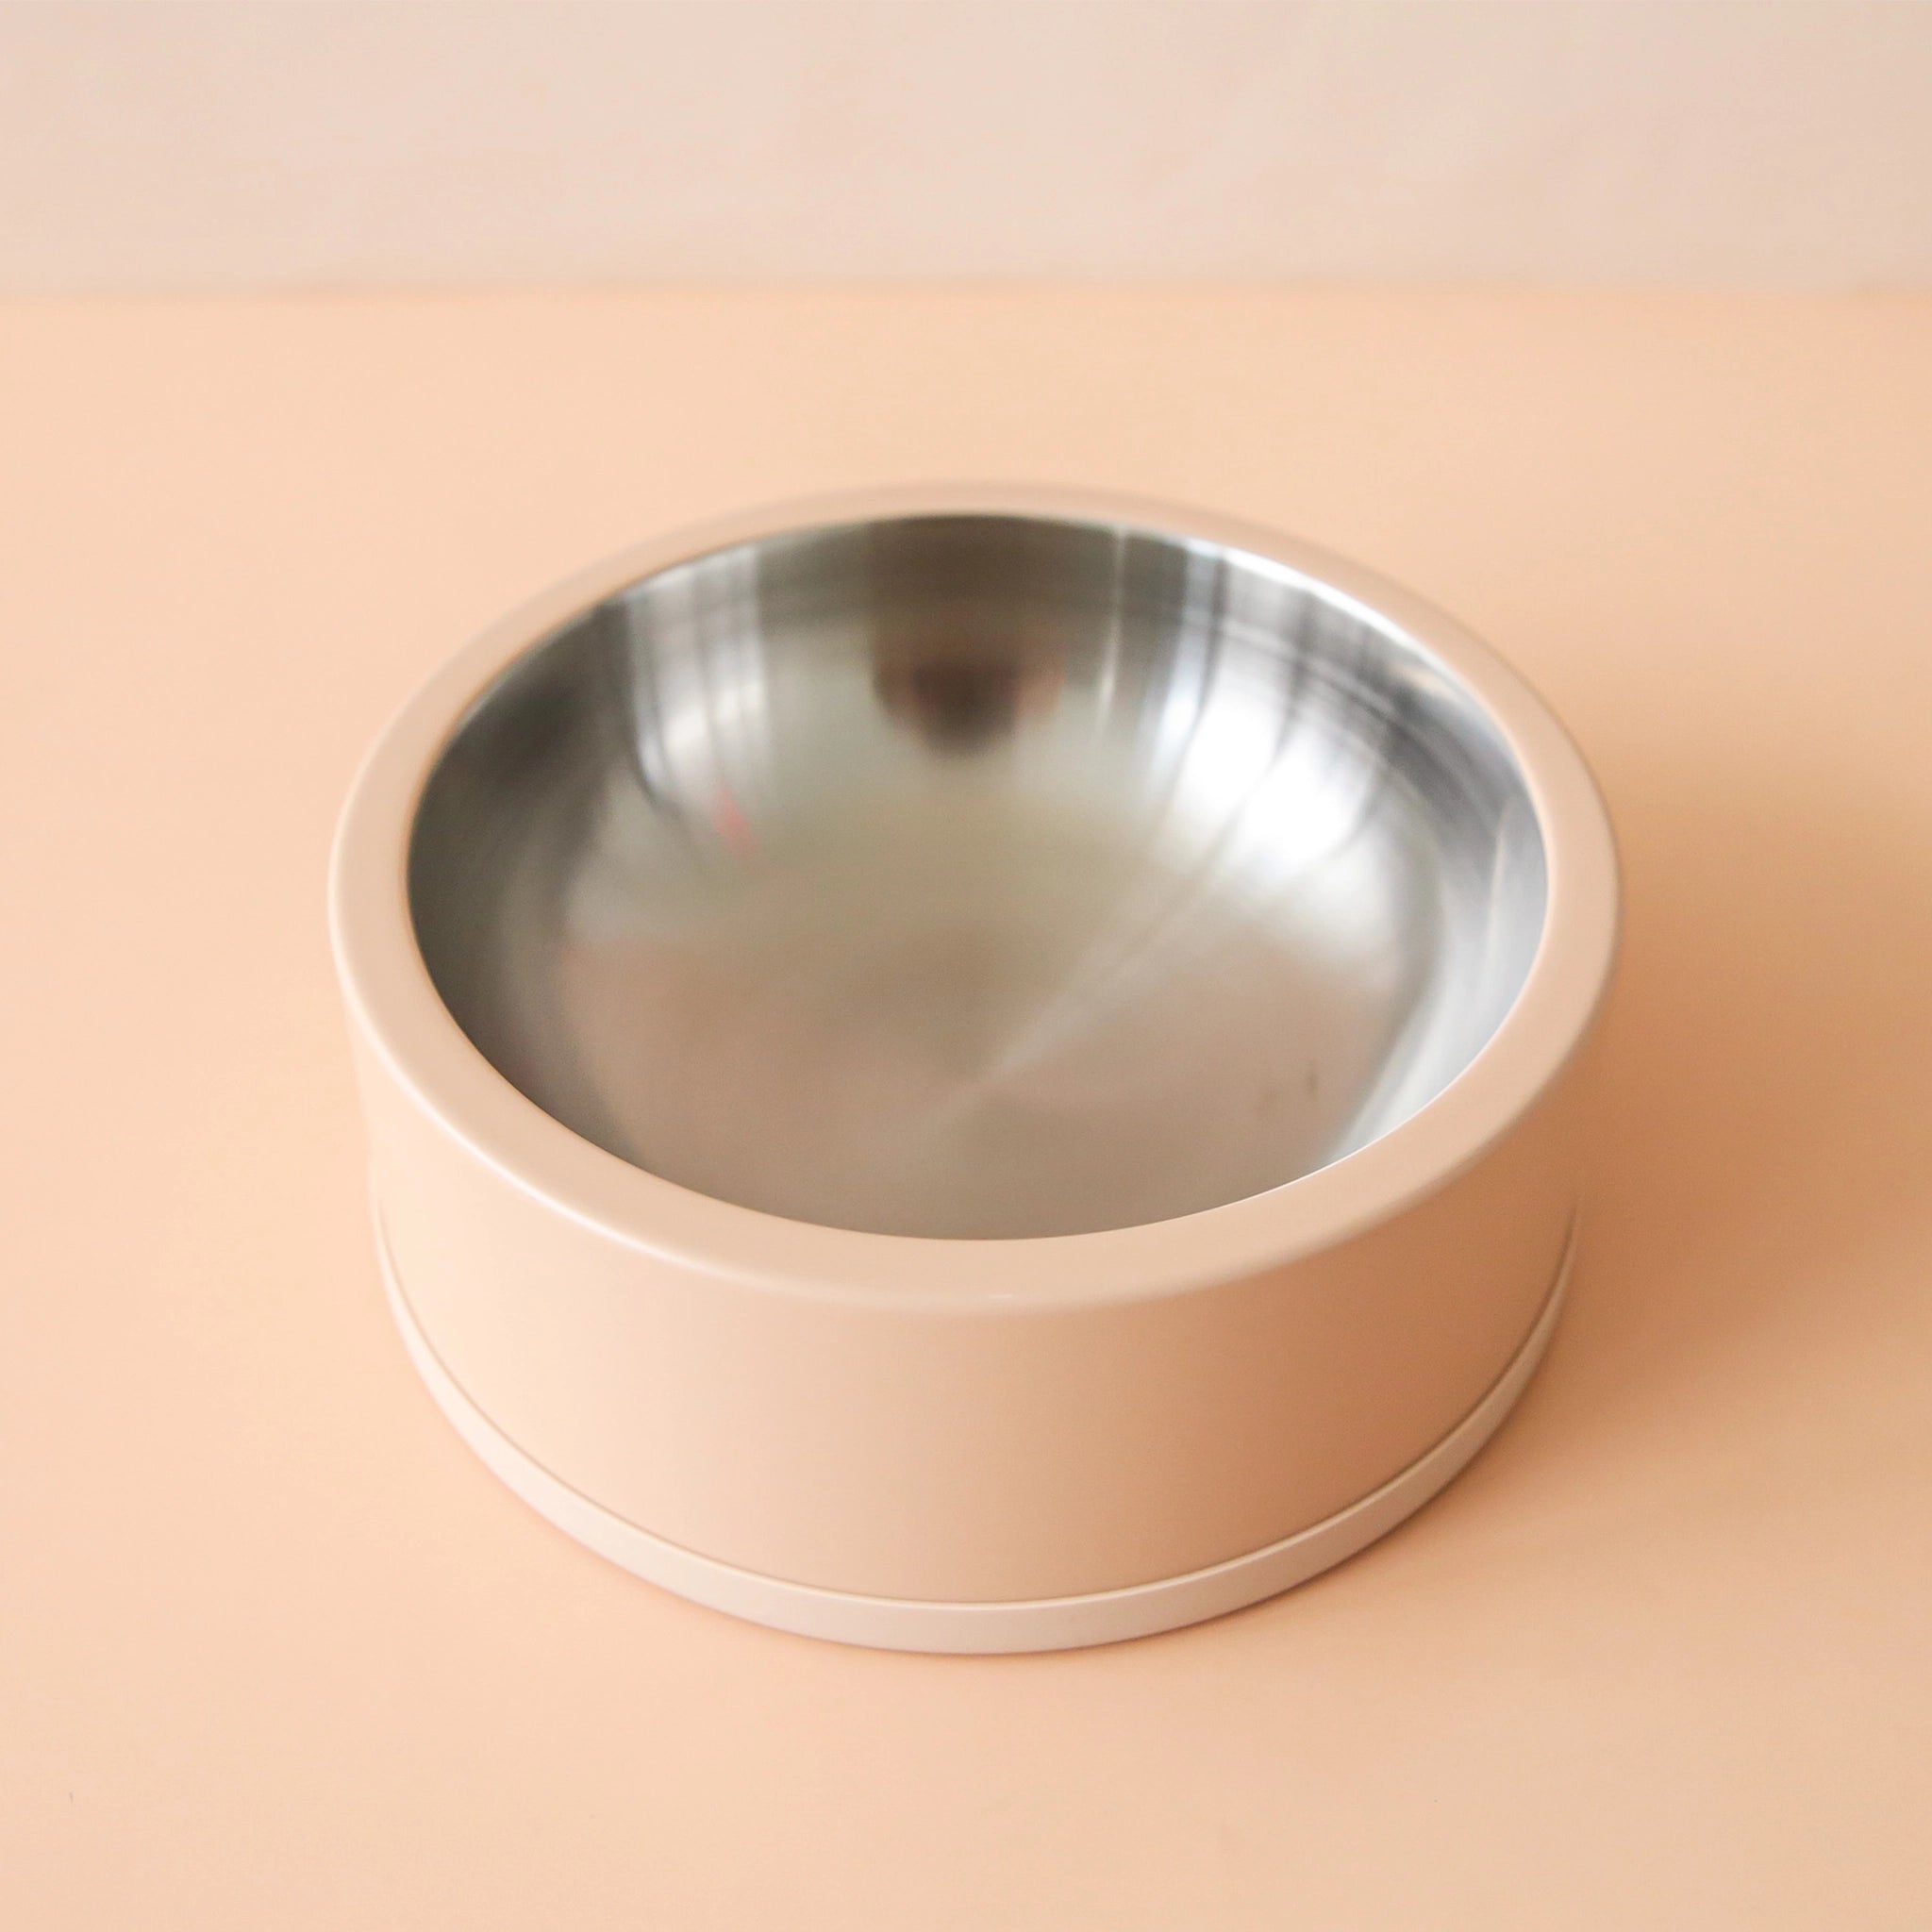 On a peachy background is an arial photograph of a dog bowl with stainless steel interior and a tan exterior.